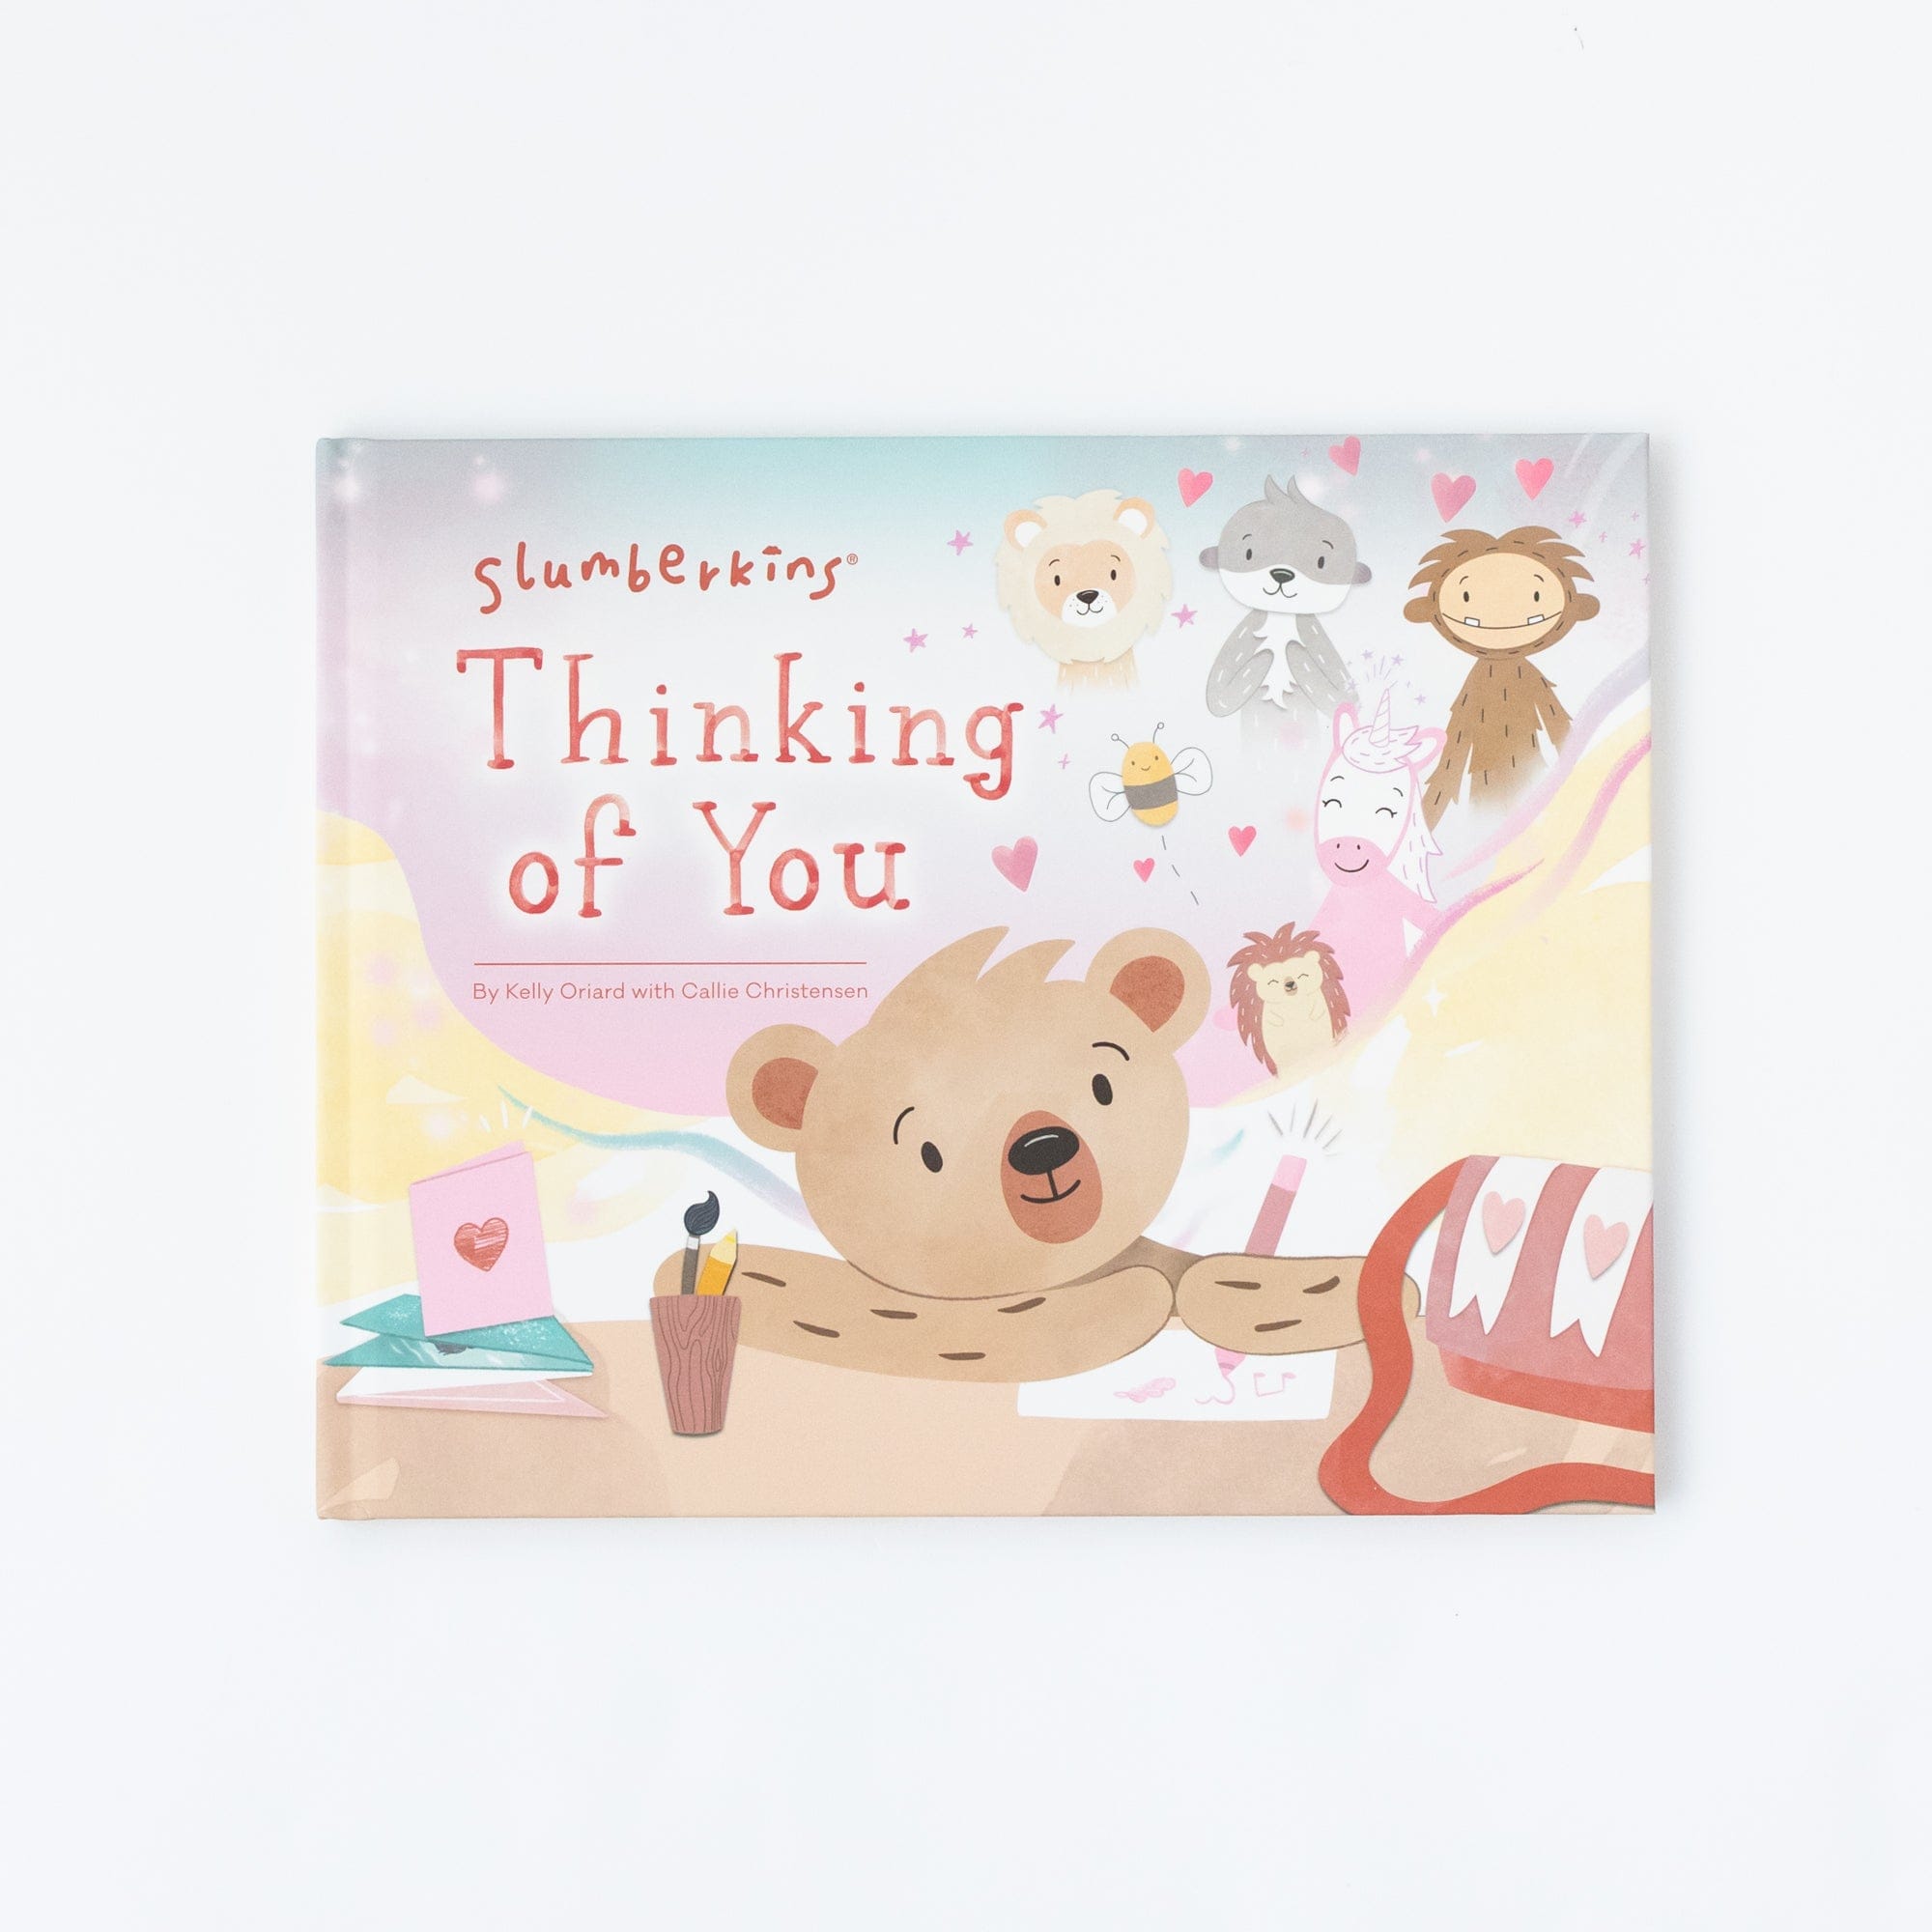 Thinking of You Hardcover Book - View Product